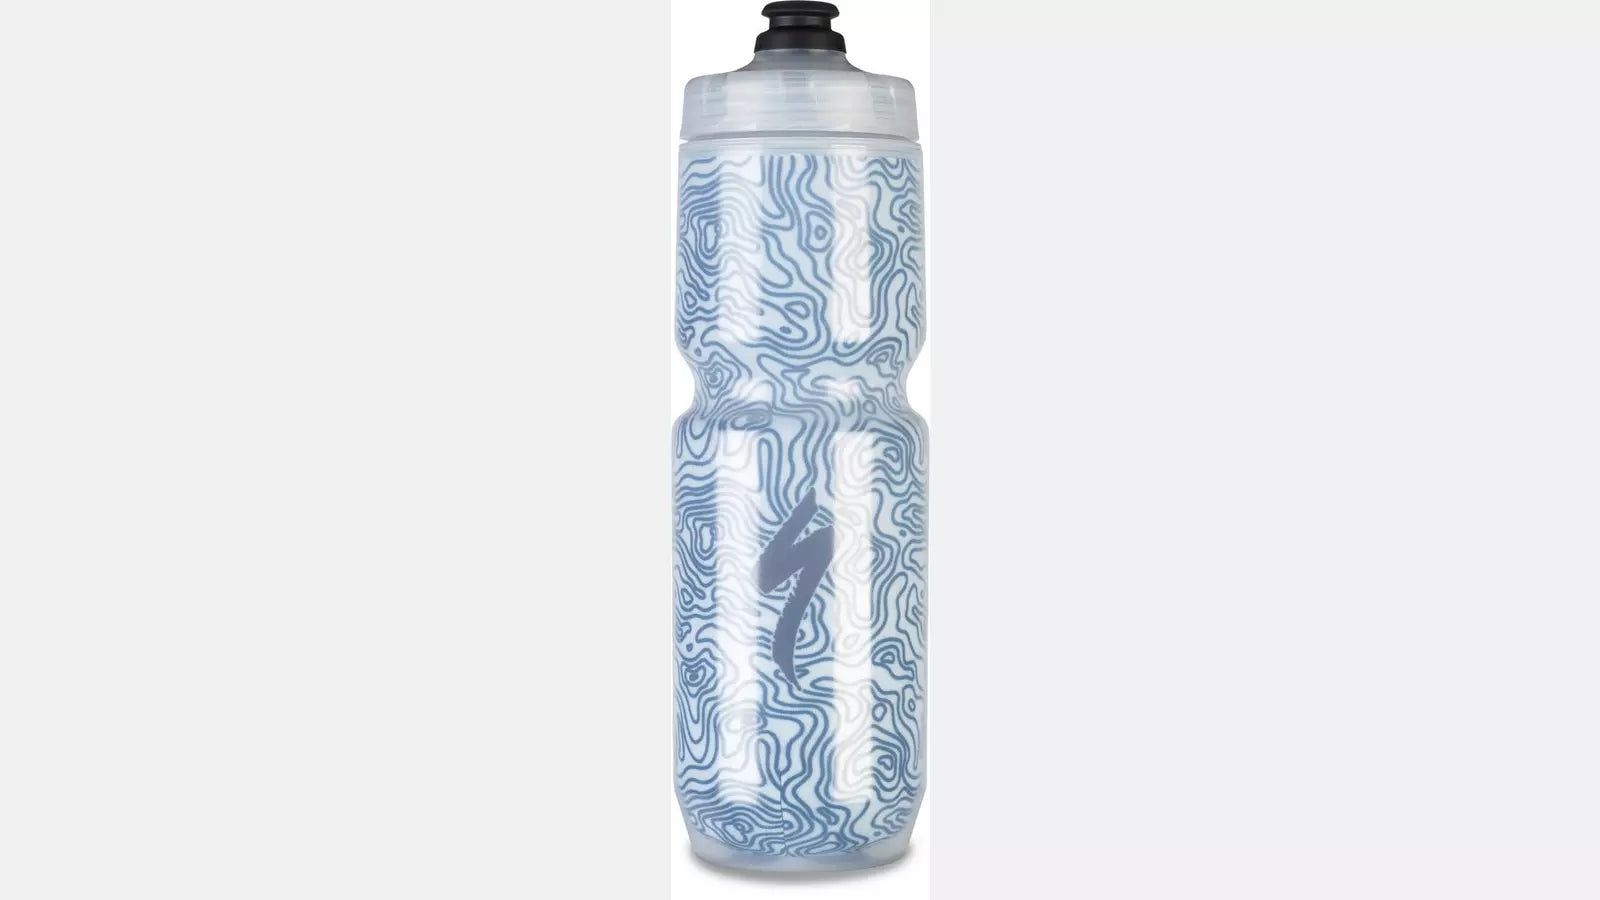 Specialized Purist Insulated water bottle with blue topography design